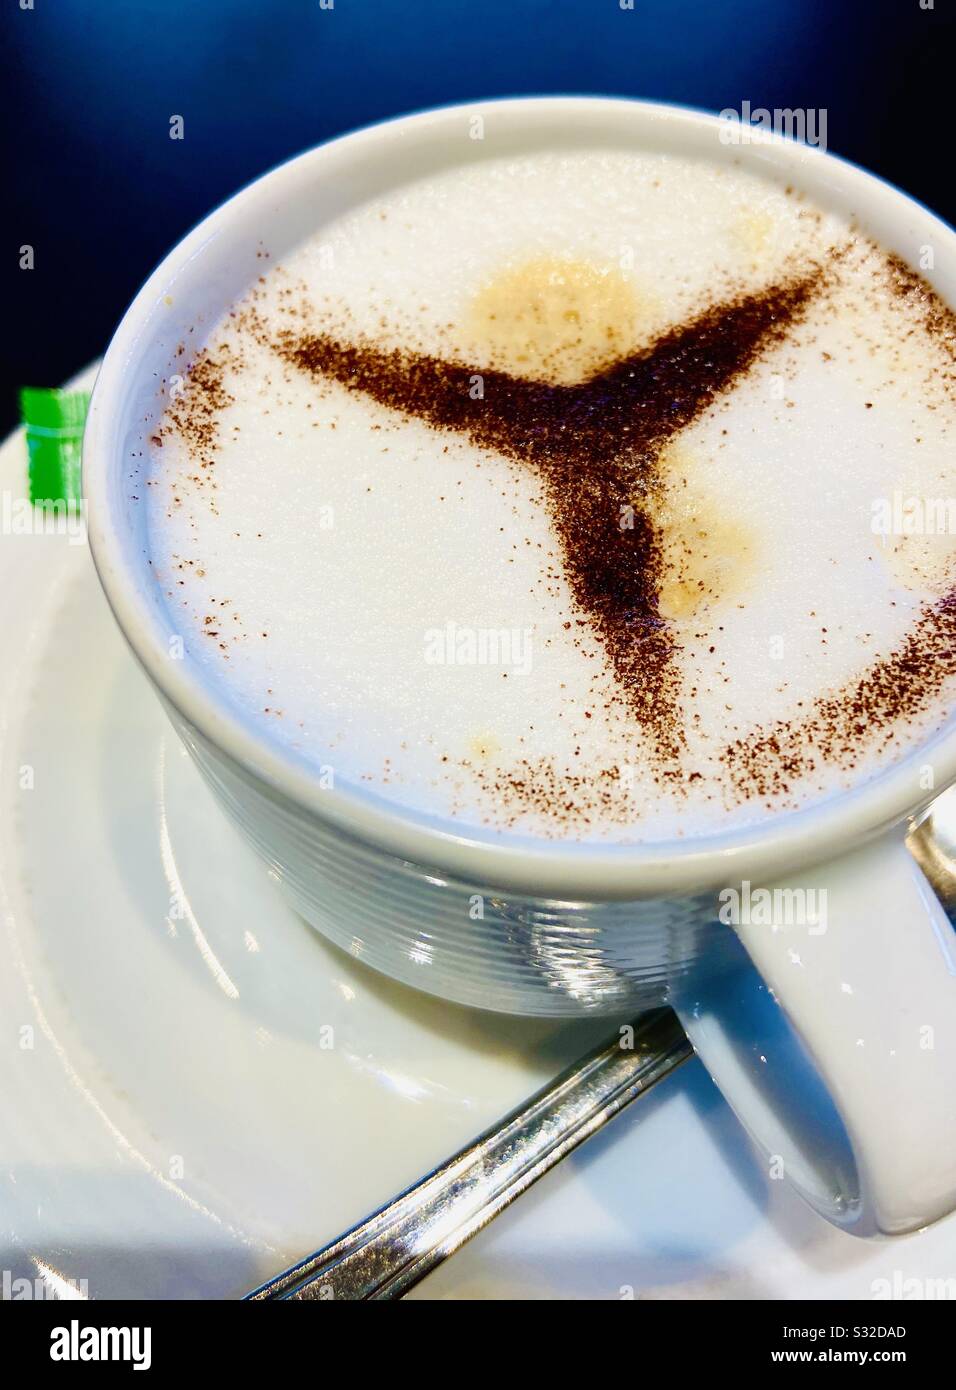 Mainz, Gernany- January 23, 2020: Mercedes Benz logo made with cocoa on a cup of cappucino Stock Photo